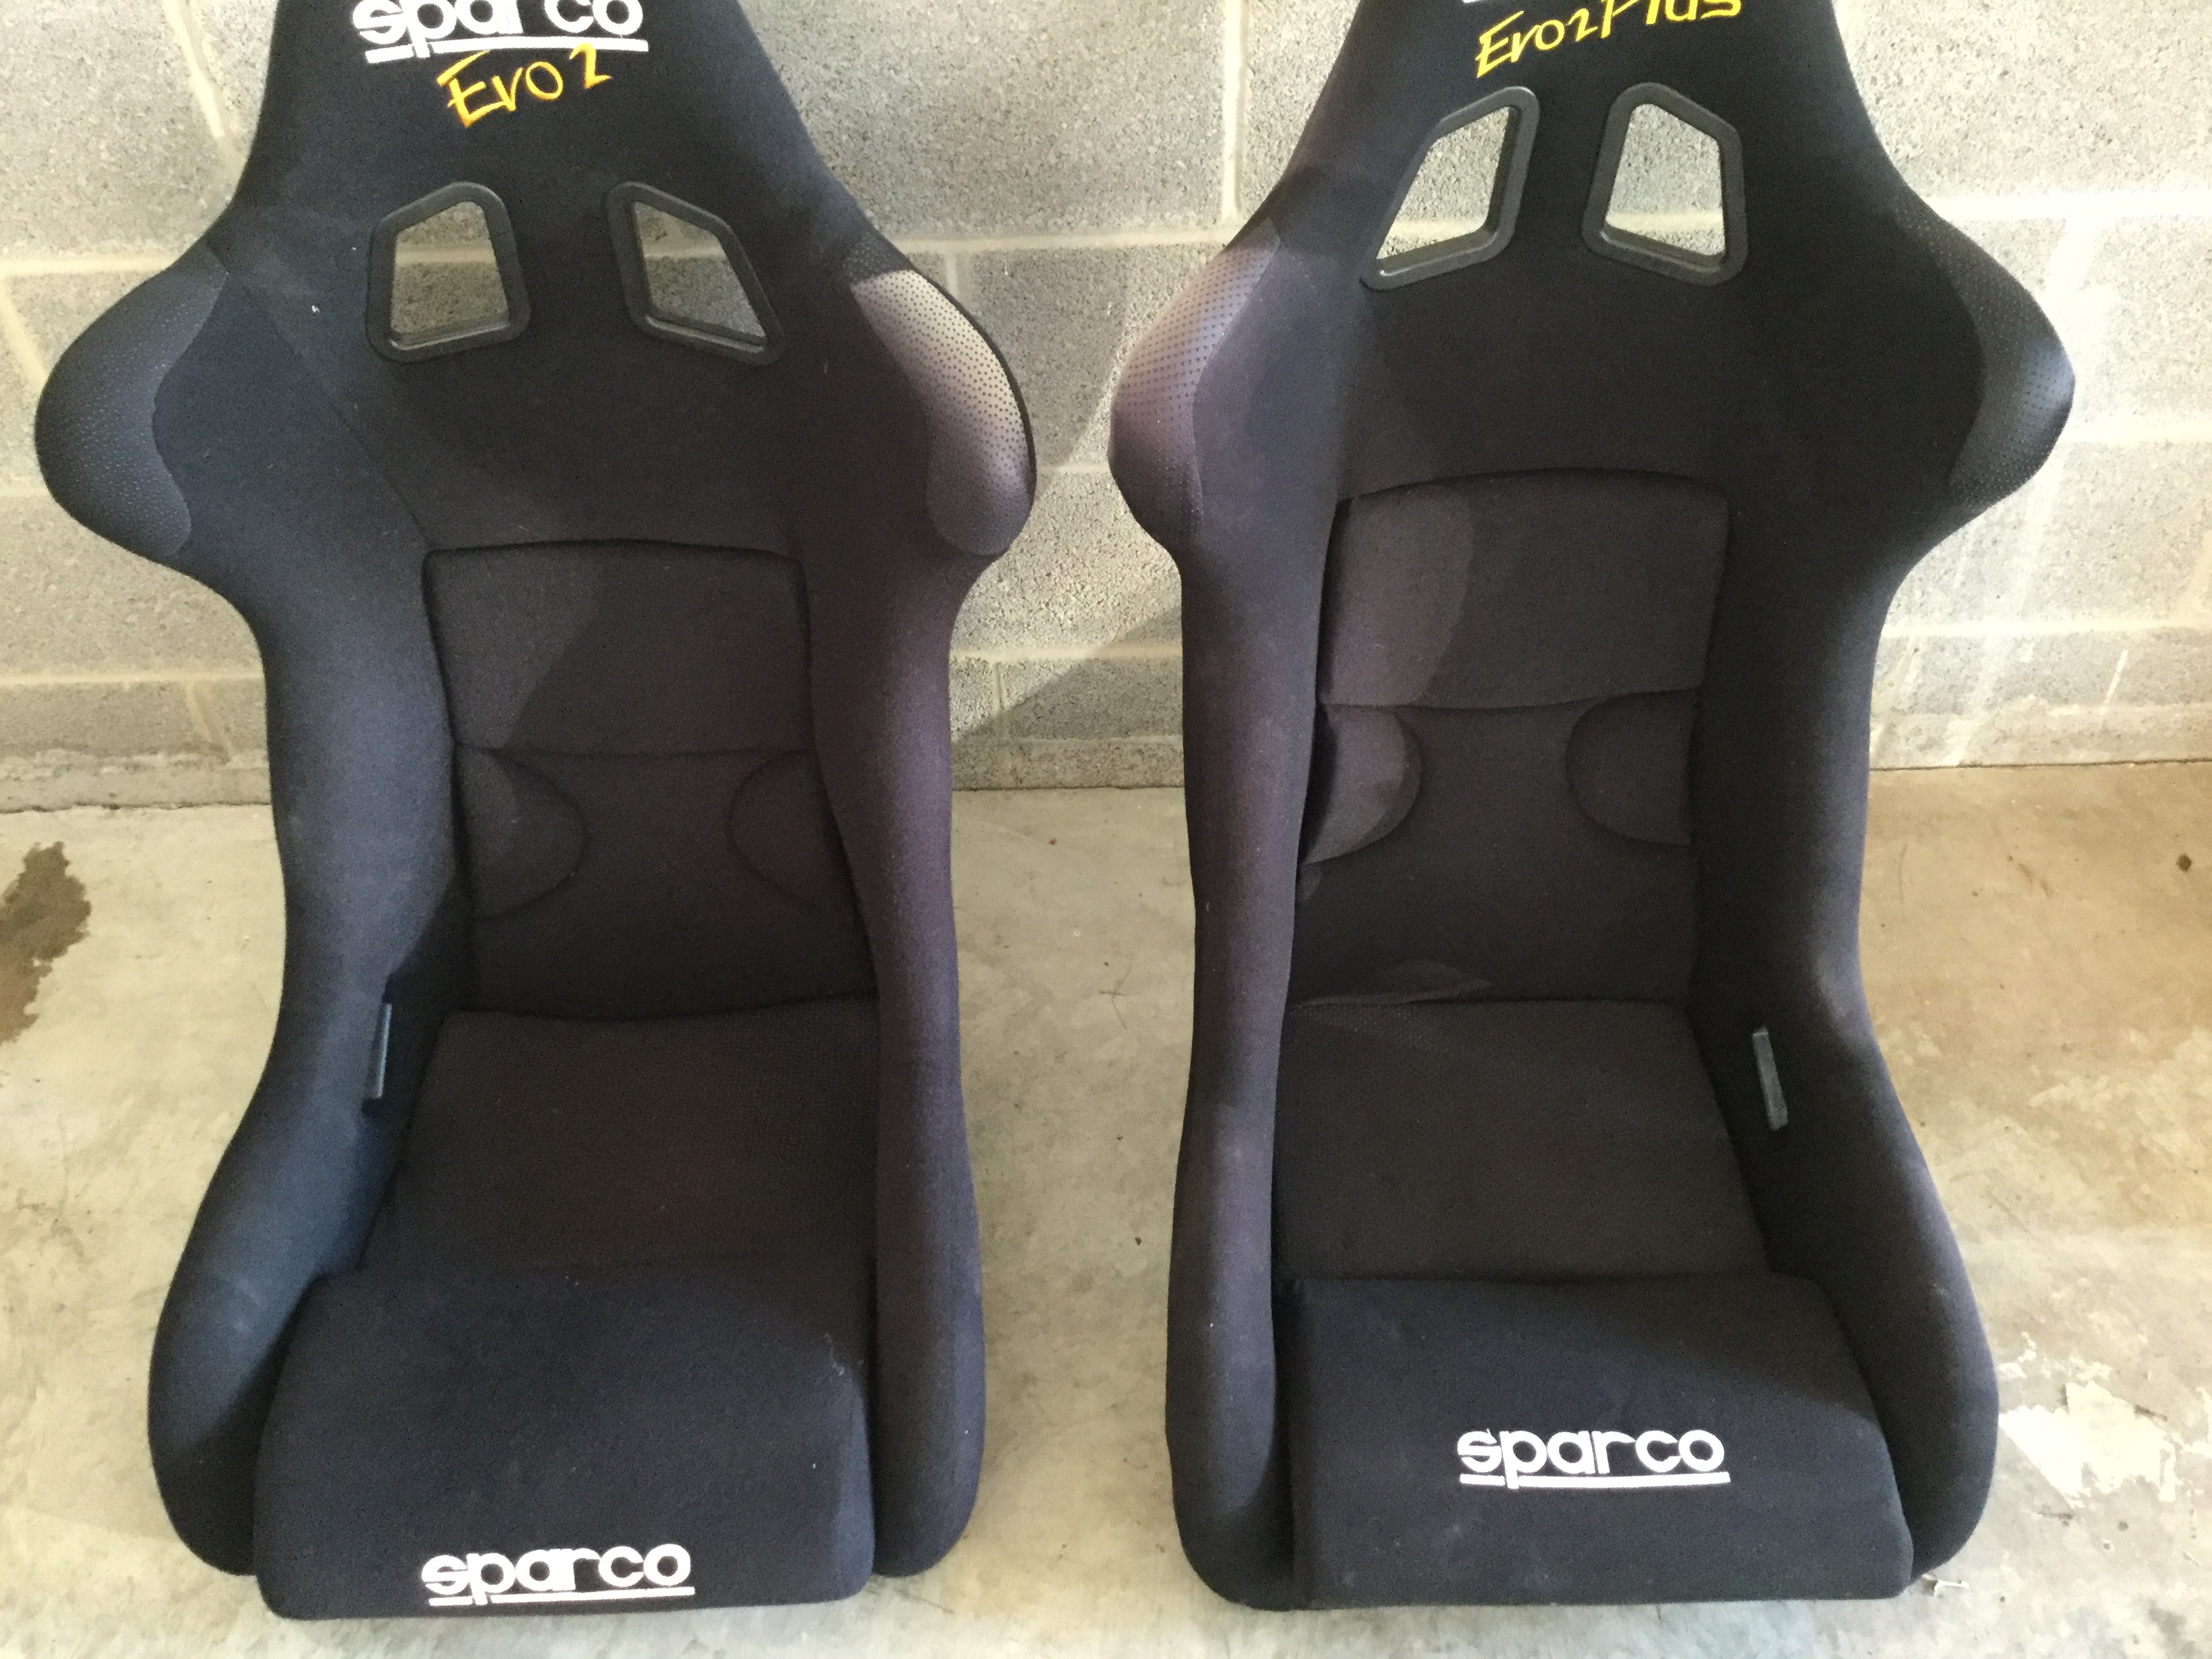 SOLD: Two sparco evo 2 racing seats - Rennlist - Porsche Discussion Forums